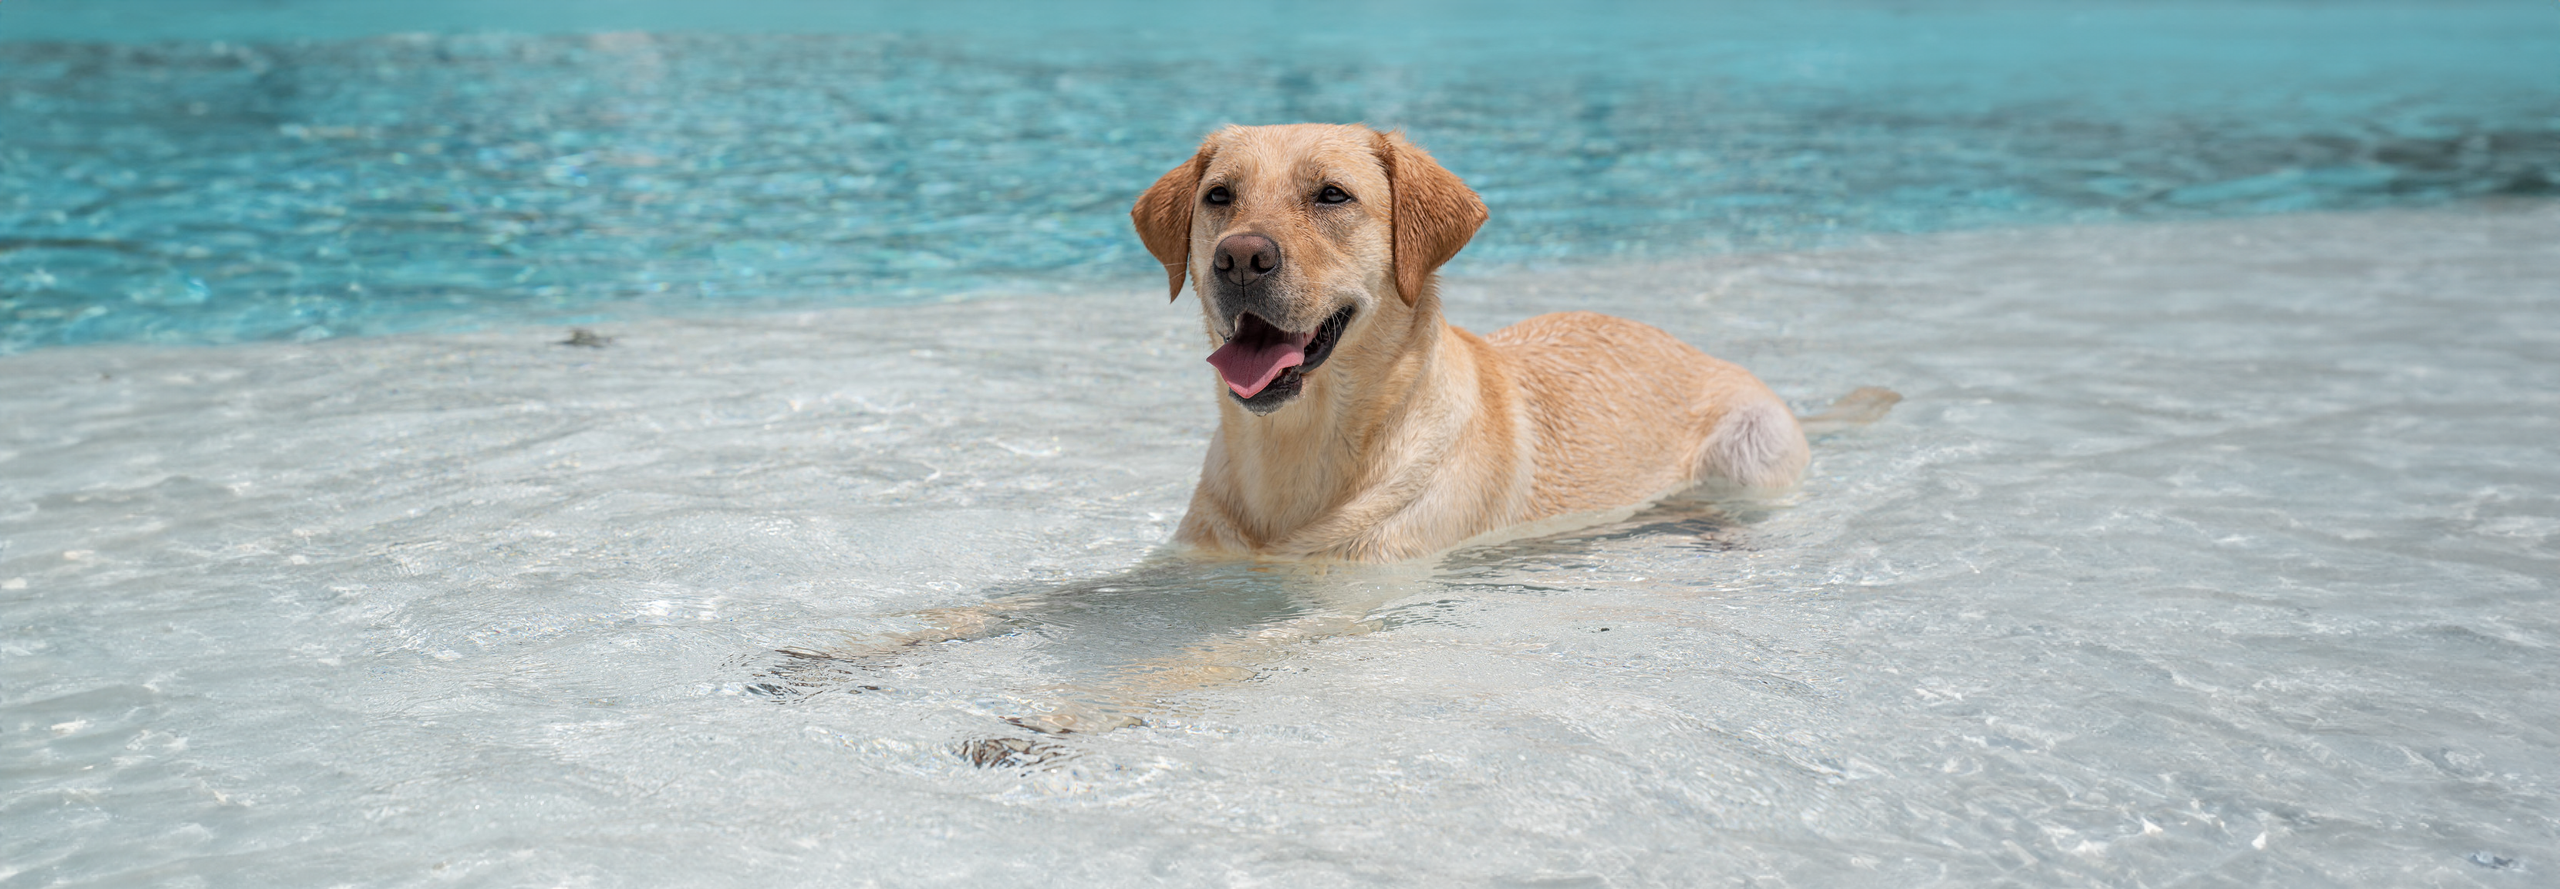 A yellow lab lays in the shallow area of a pool to beat the summer heat